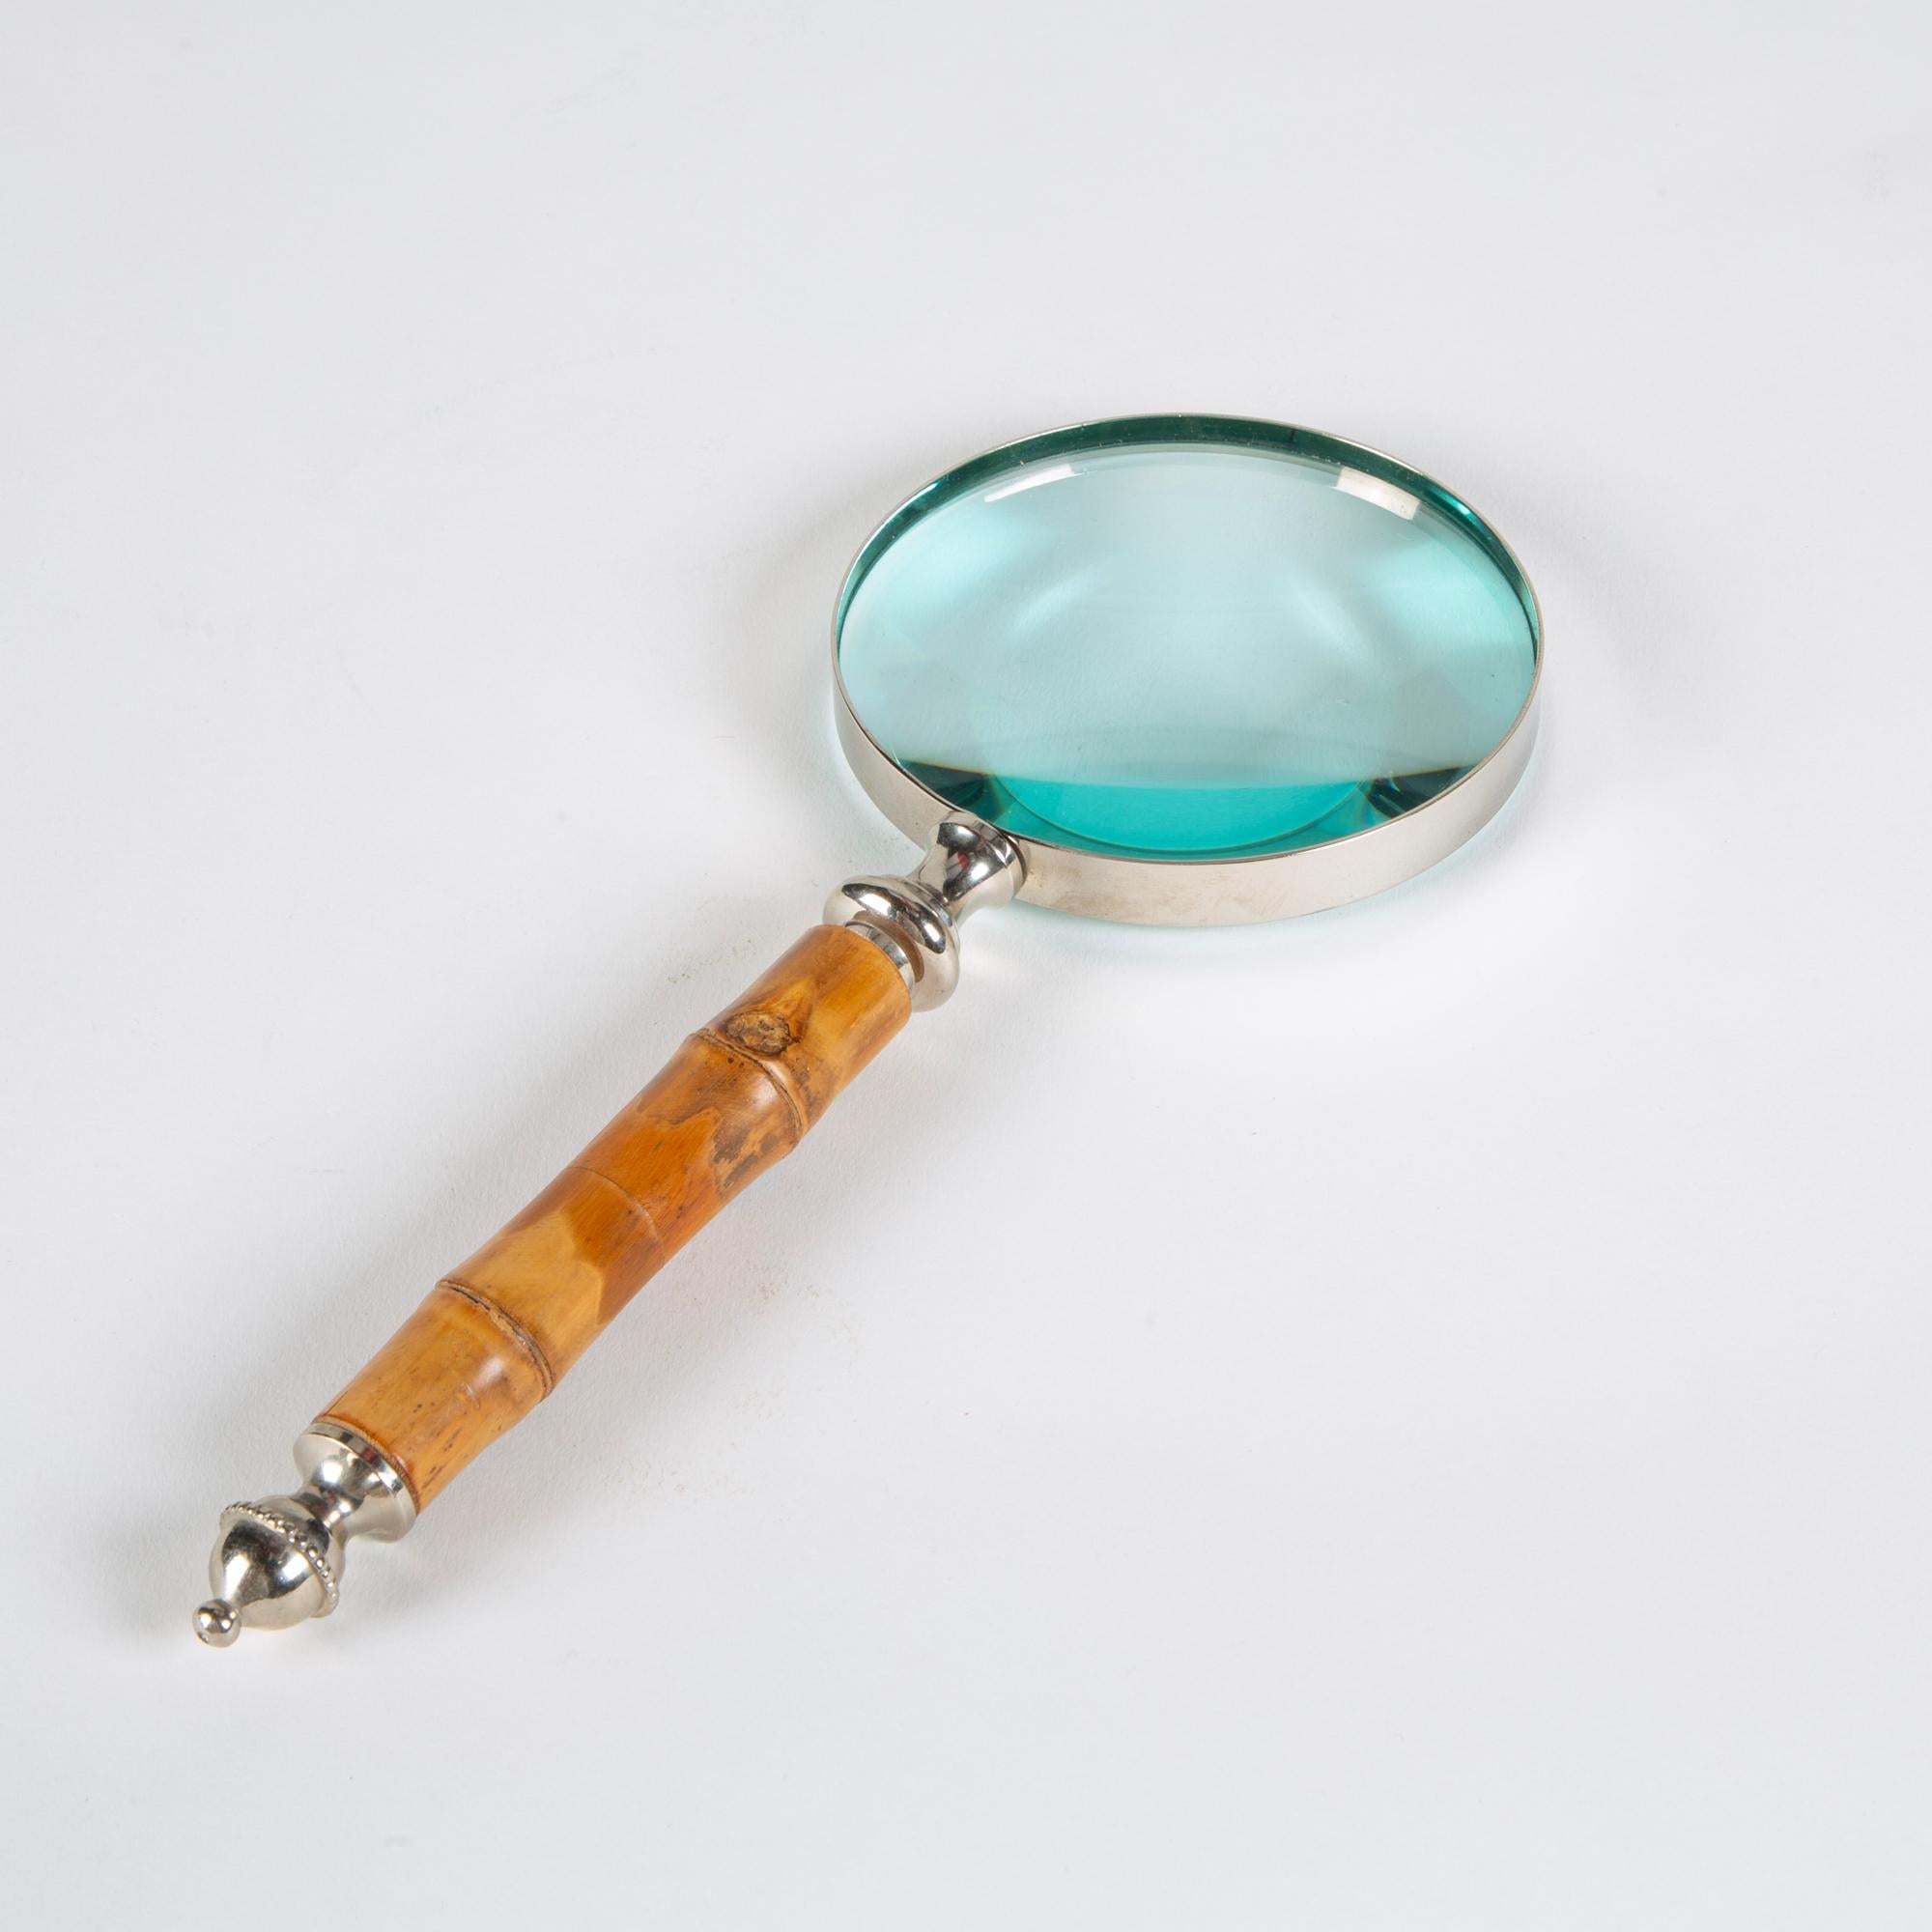 Silver metal frame magnifying glass with a bamboo handle in varying tones of brown. A fun addition to a bookshelf or coffee table décor.

Dimensions: 10.25